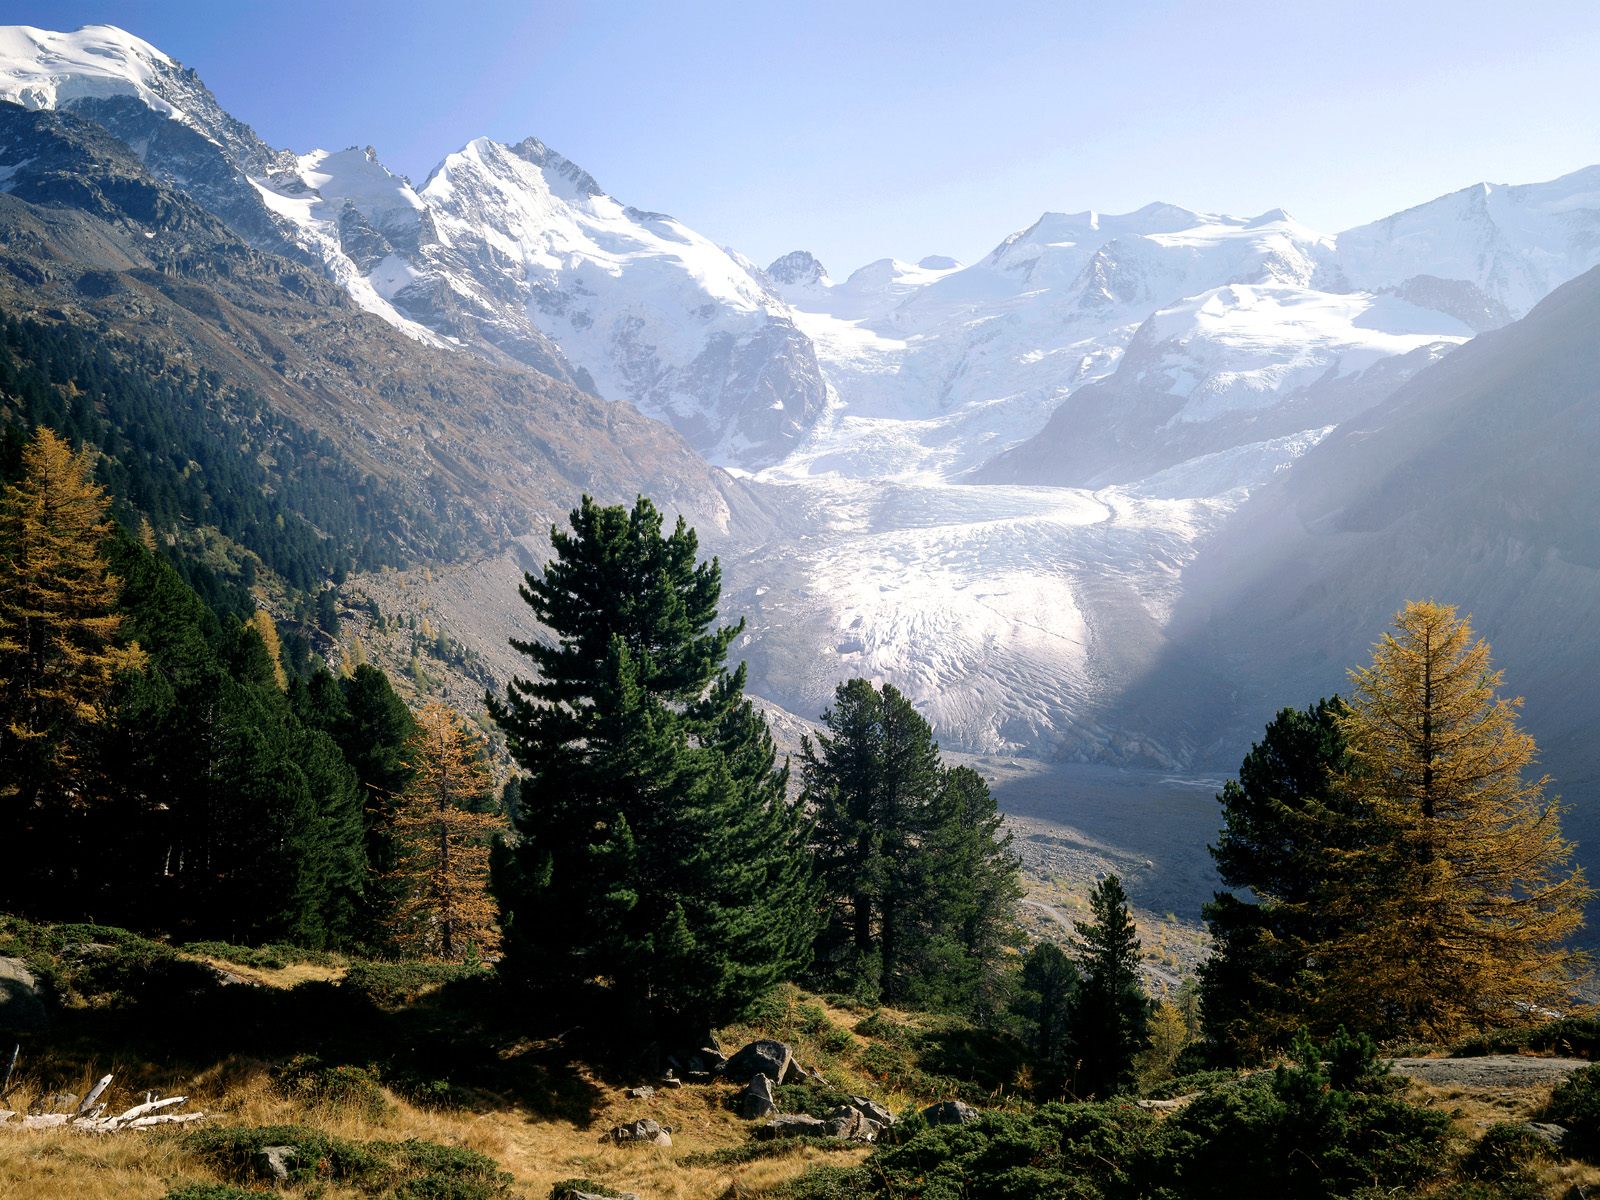 Glacier in Switzerland - A stunning view of snowy mountains in the Swiss Alps.